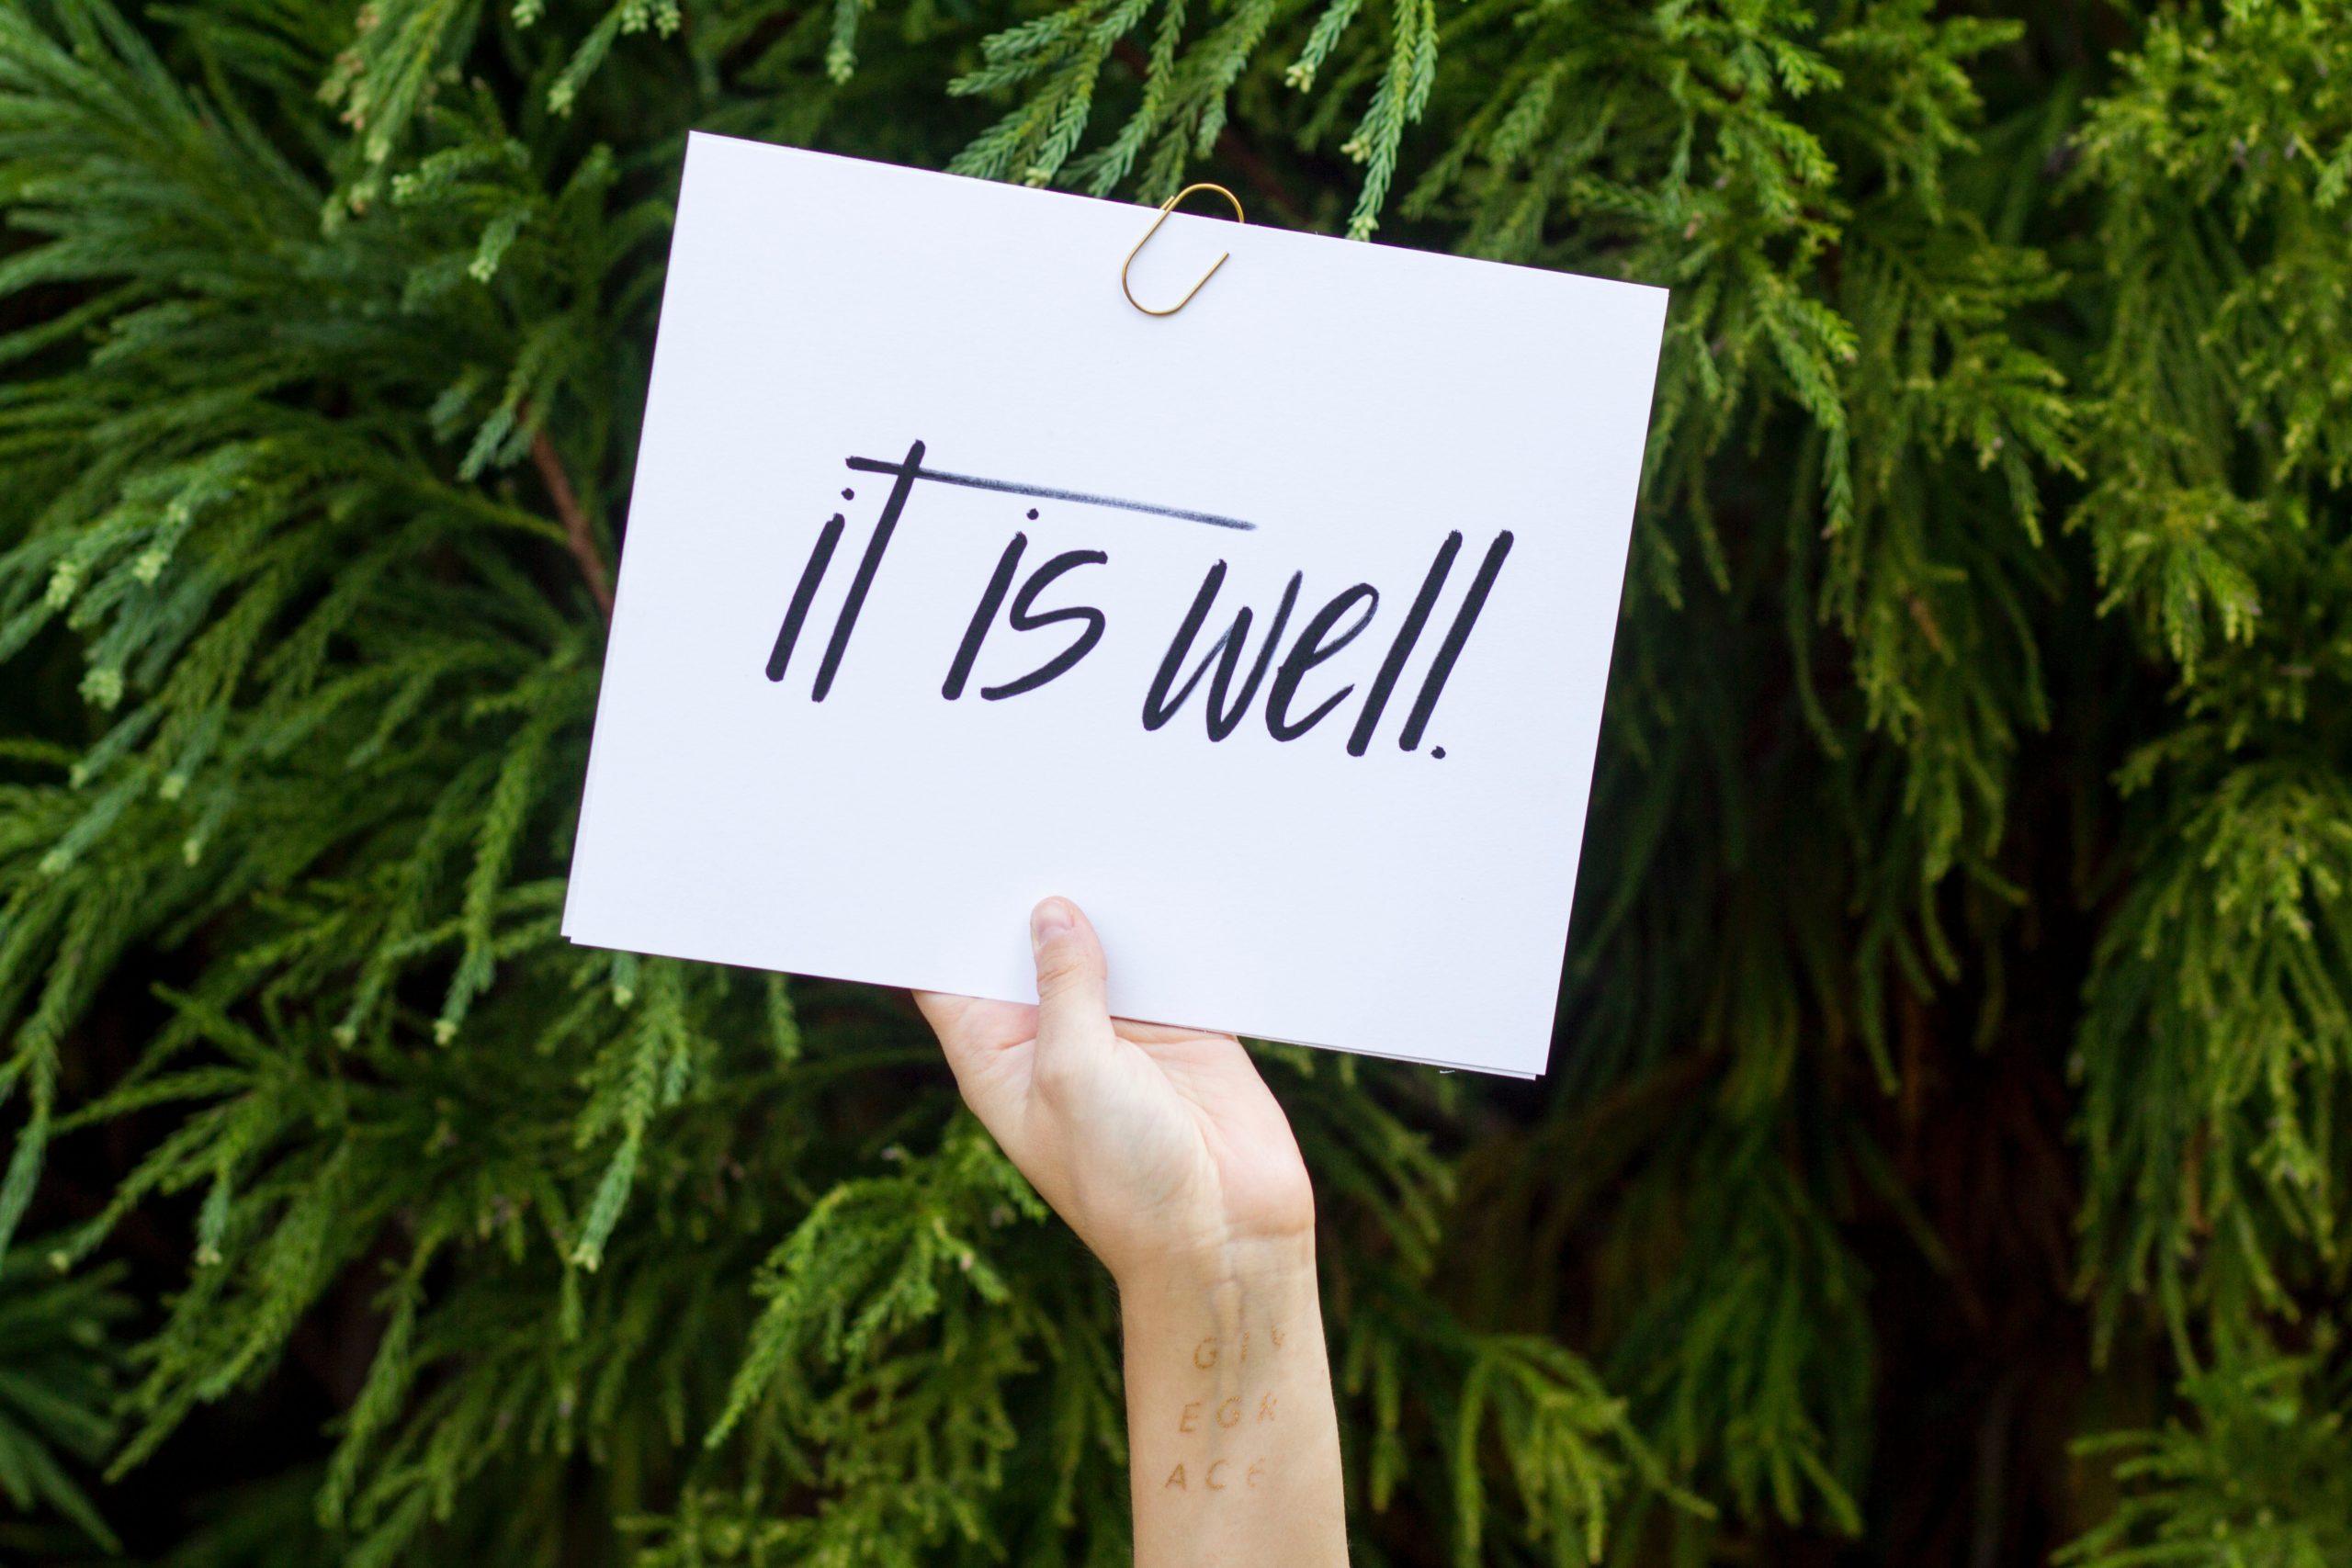 a hand holding up a white sign with black letters saying, "it is well"